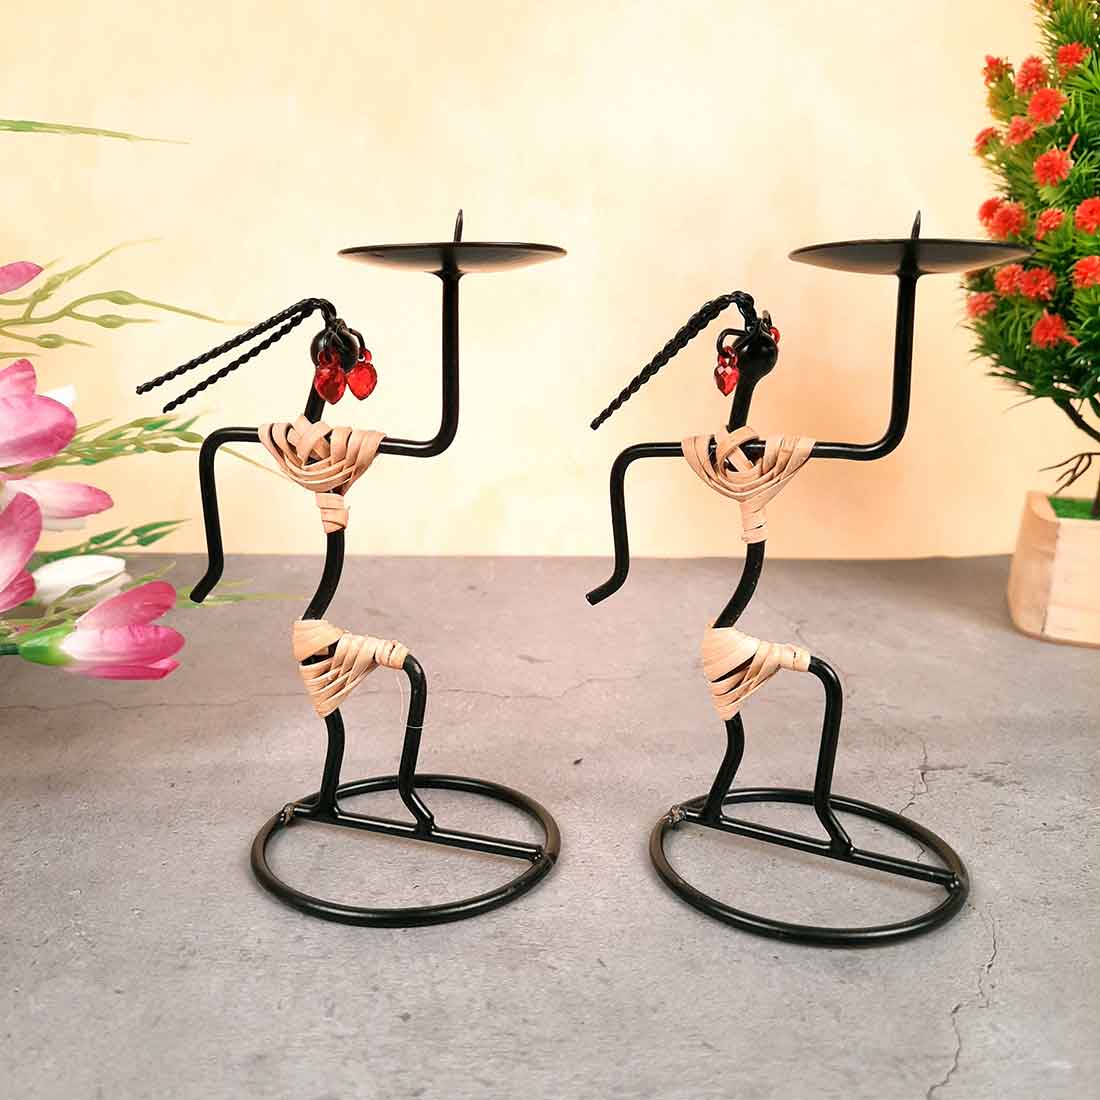 Candle Holder Stand | TeaLight Holder With One Slots Cum Showpiece  | Tea Light Candle Stands - Dancing Lady Design - For Home, Table, Living Room, Dining room, Bedroom Decor | For Diwali Decoration & Gifts - Set of 2